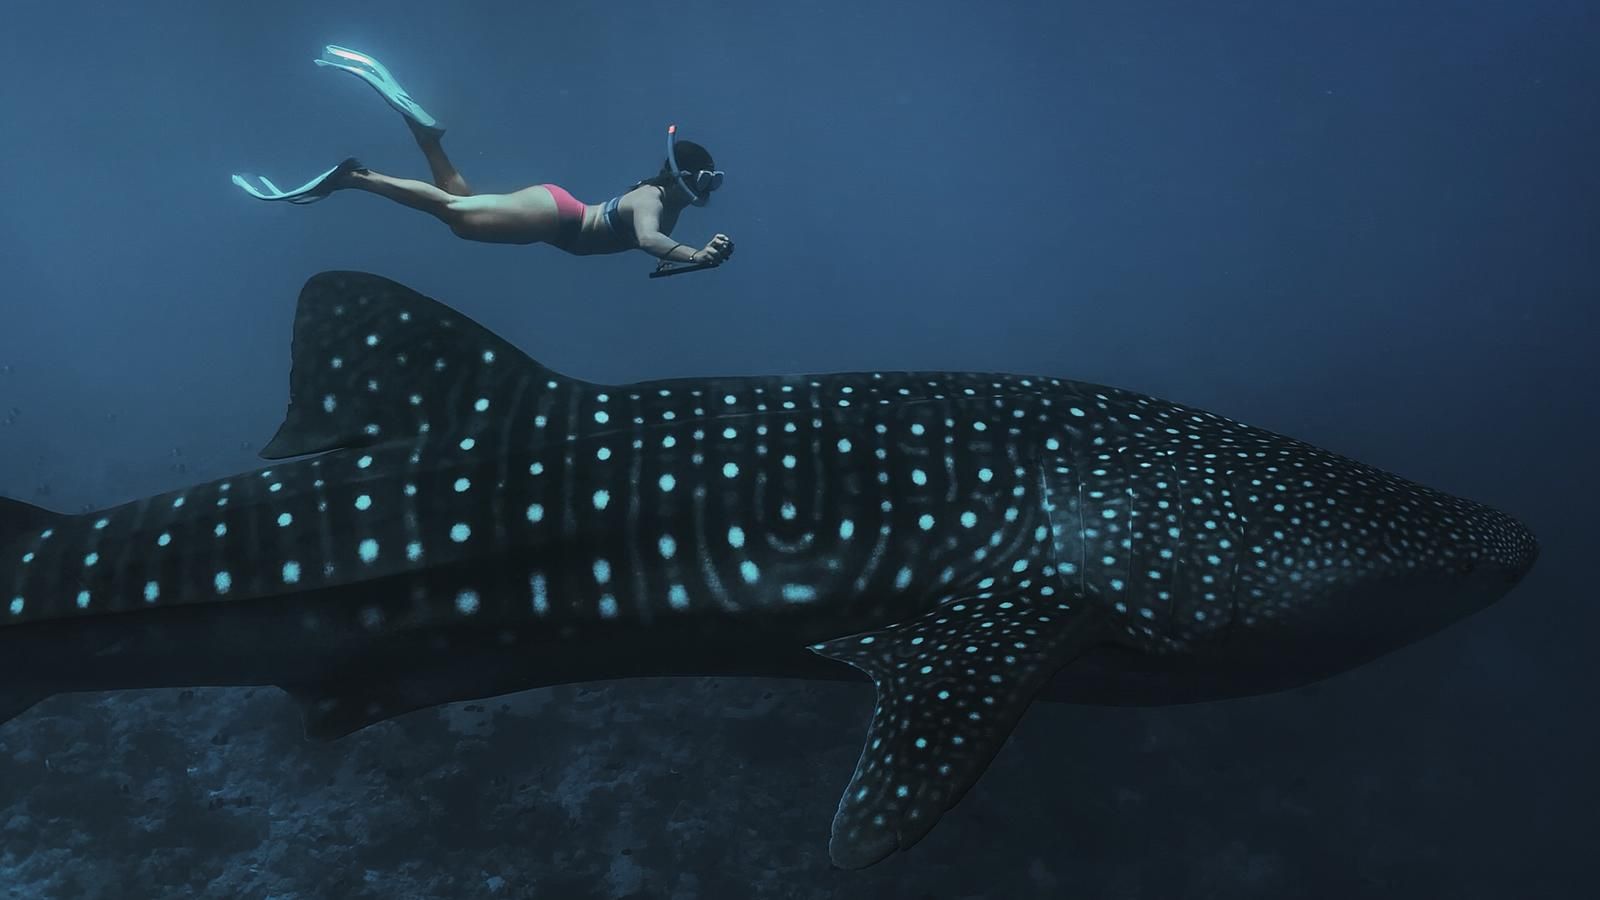 A conservation volunteer is diving with a whale shark in the Indian Ocean